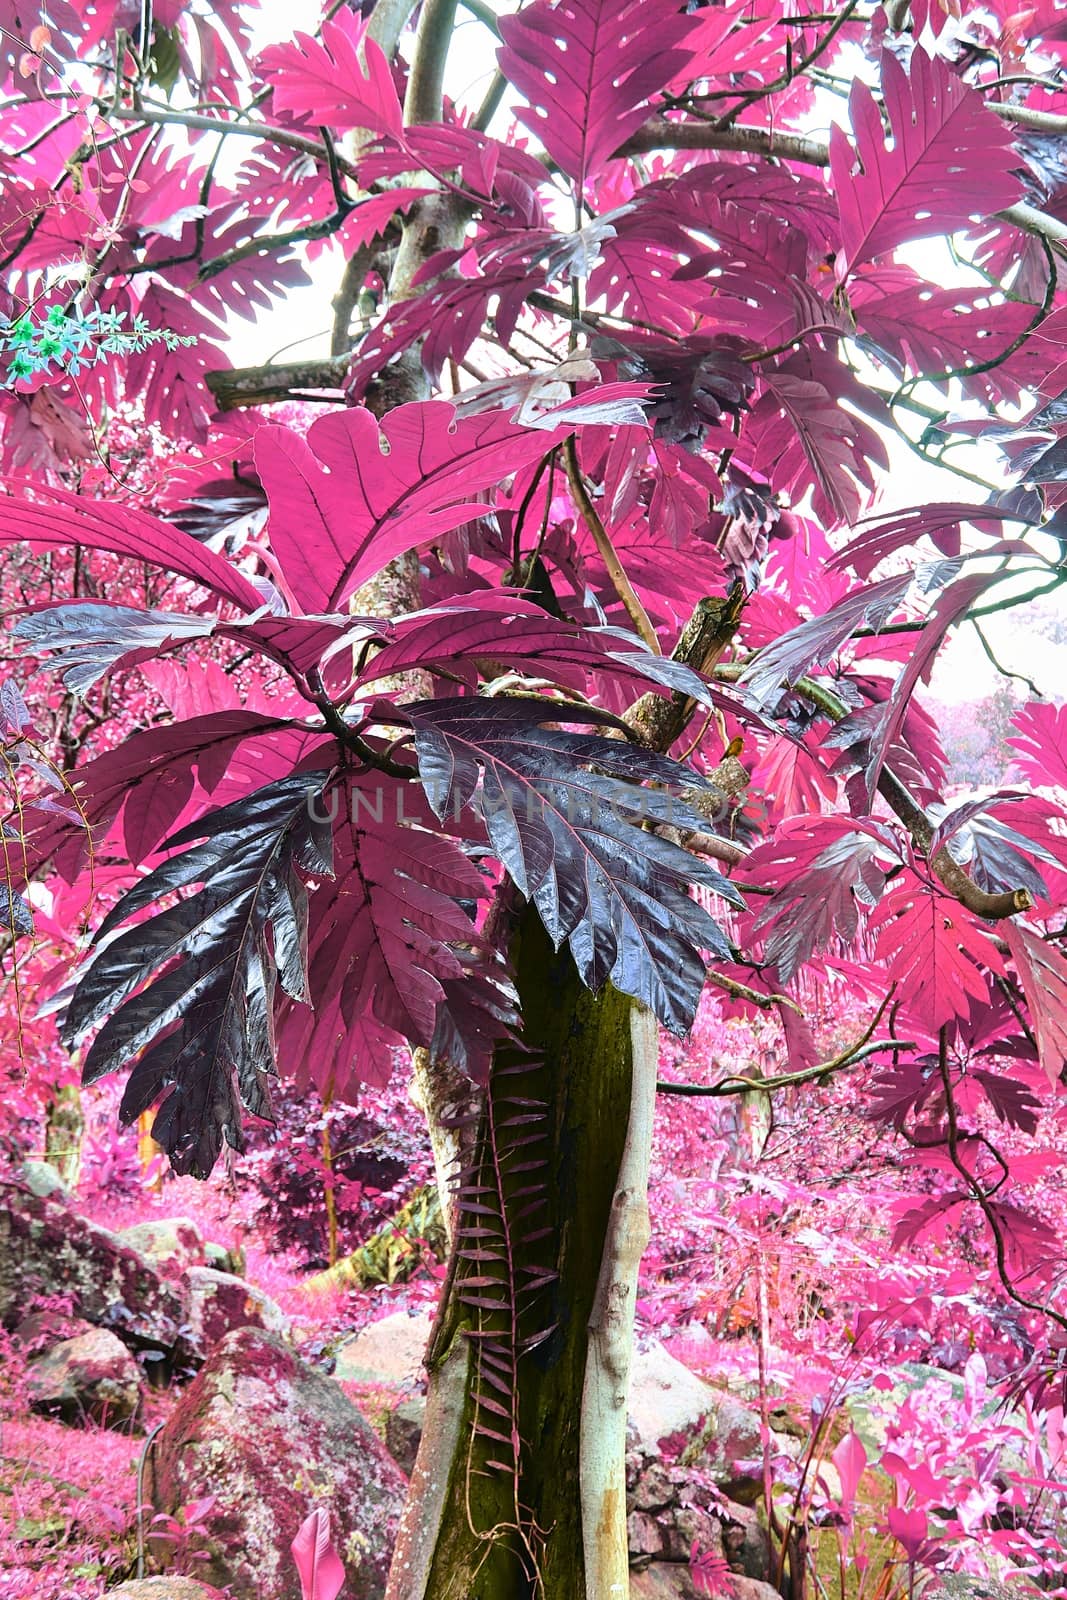 Beautiful infrared close up shots of tropical plant leaves taken on the tropical Seychelles islands